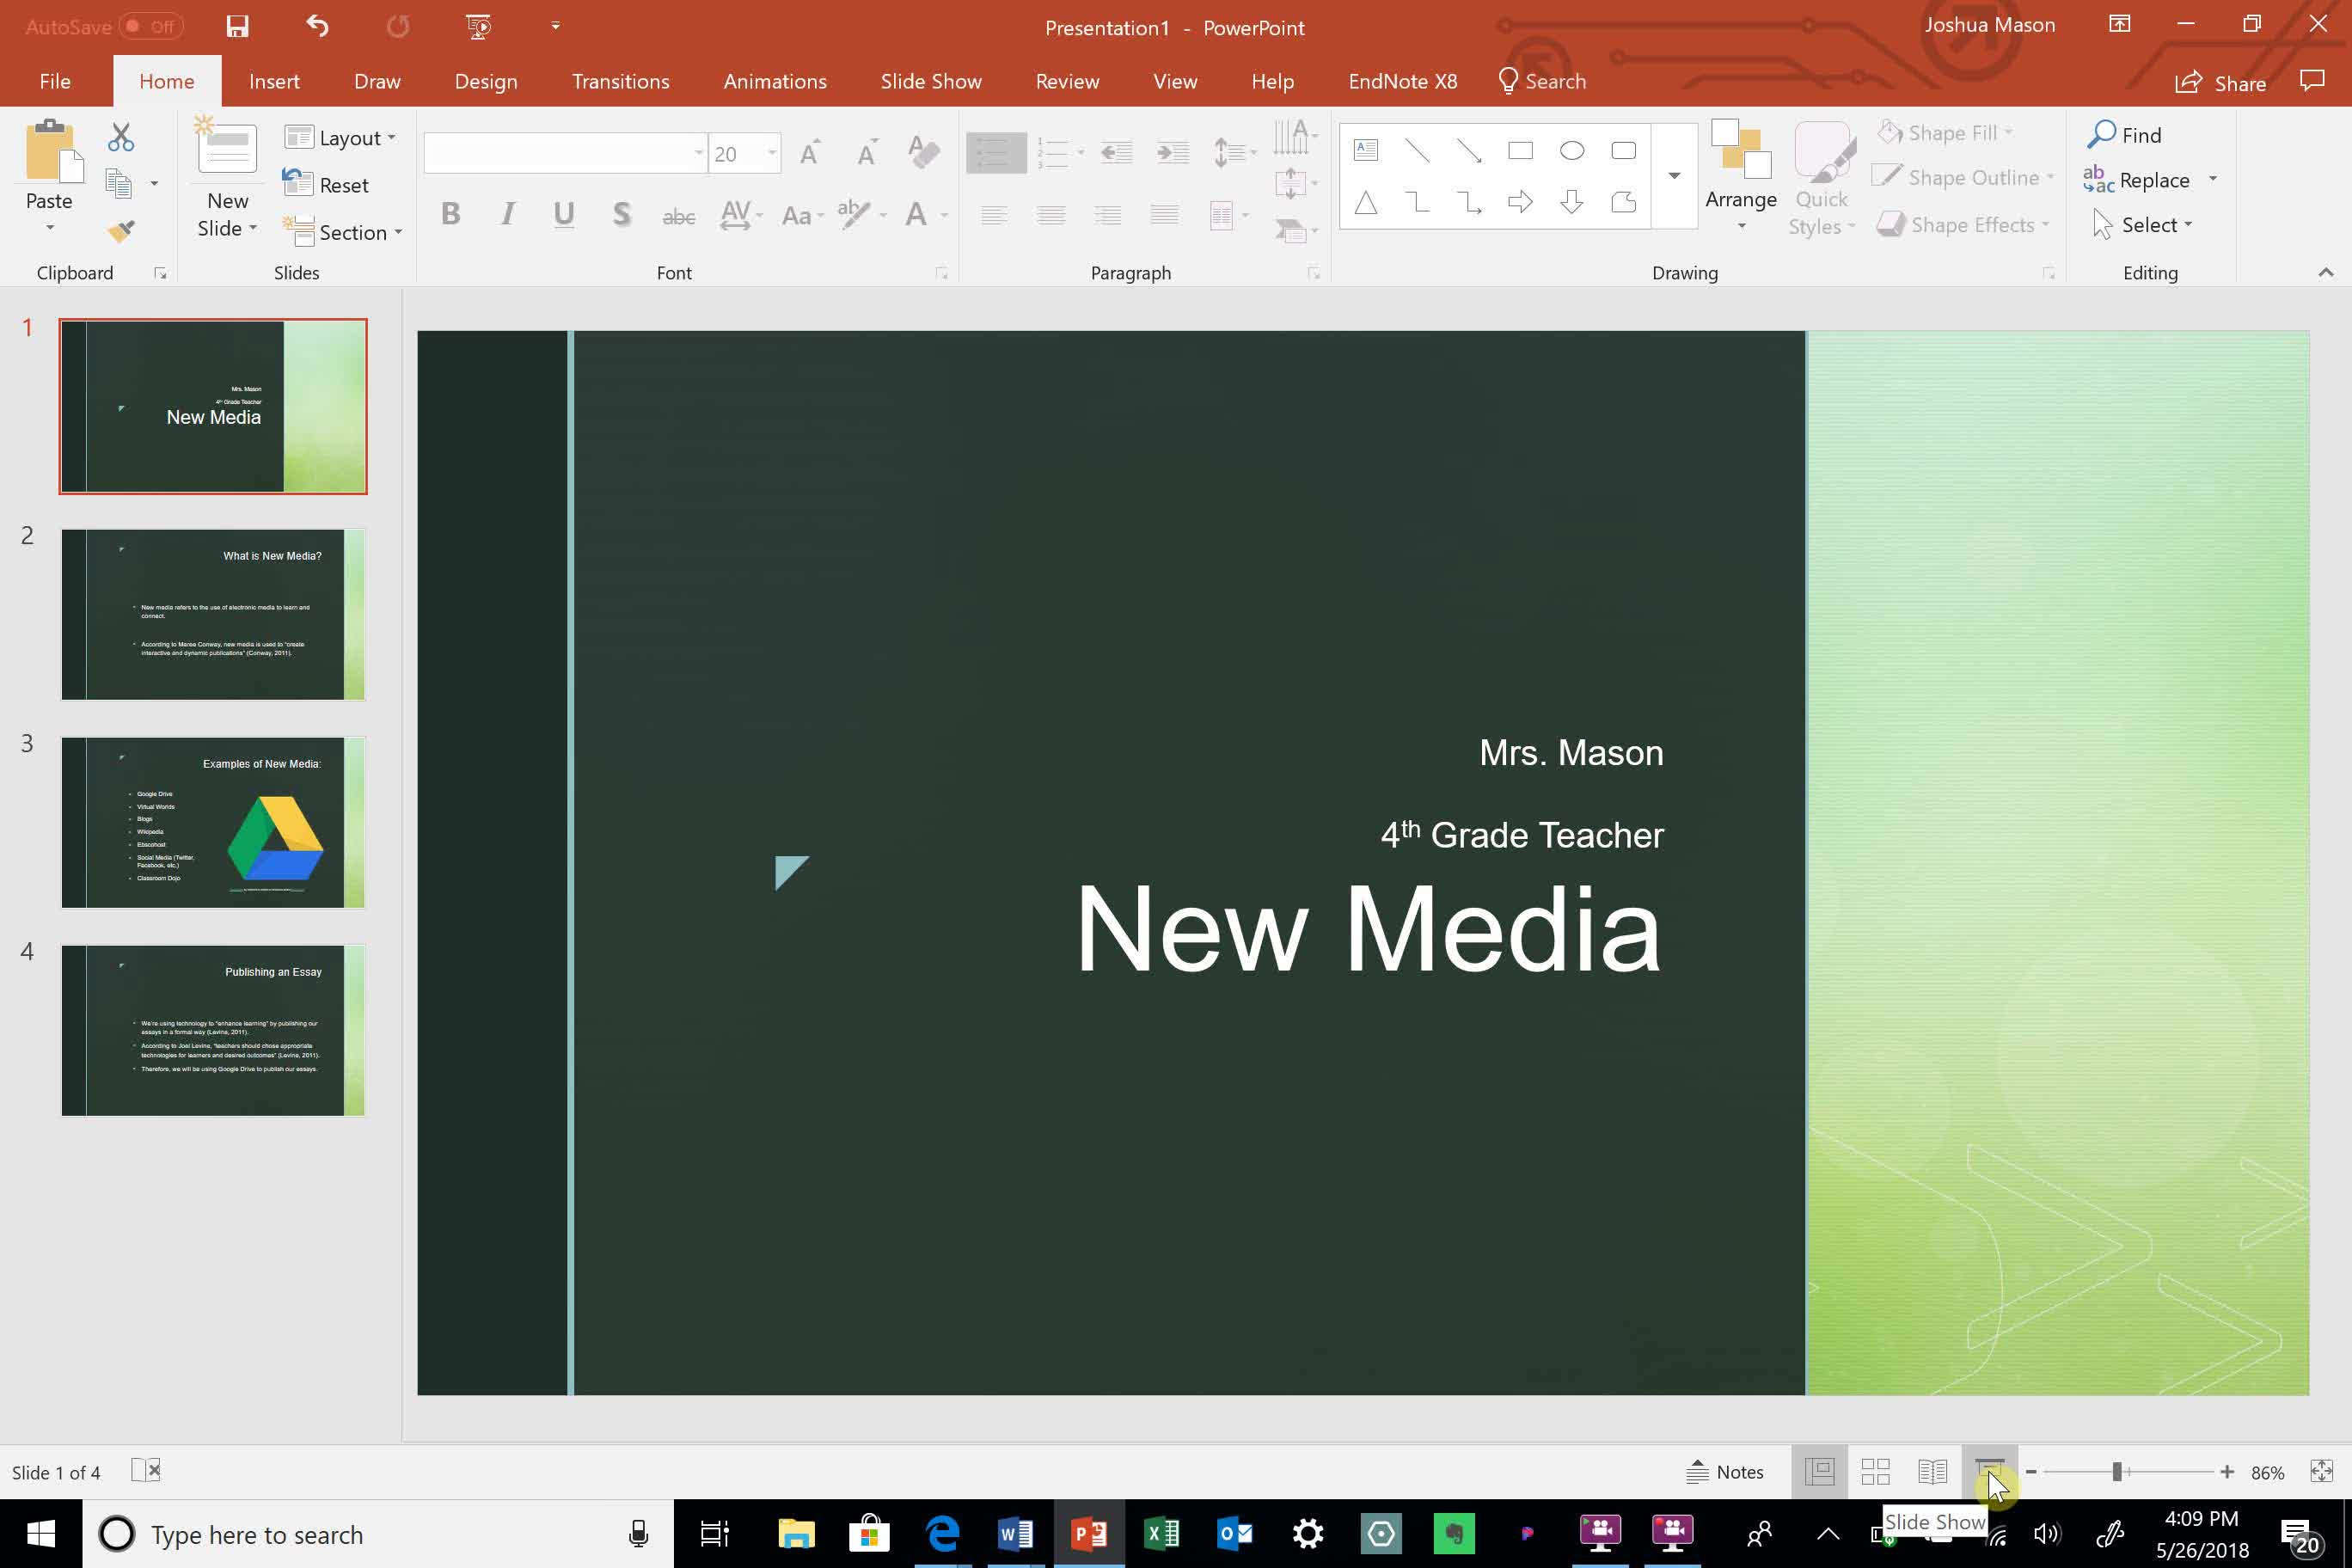 What is New Media? by Mrs. Mason